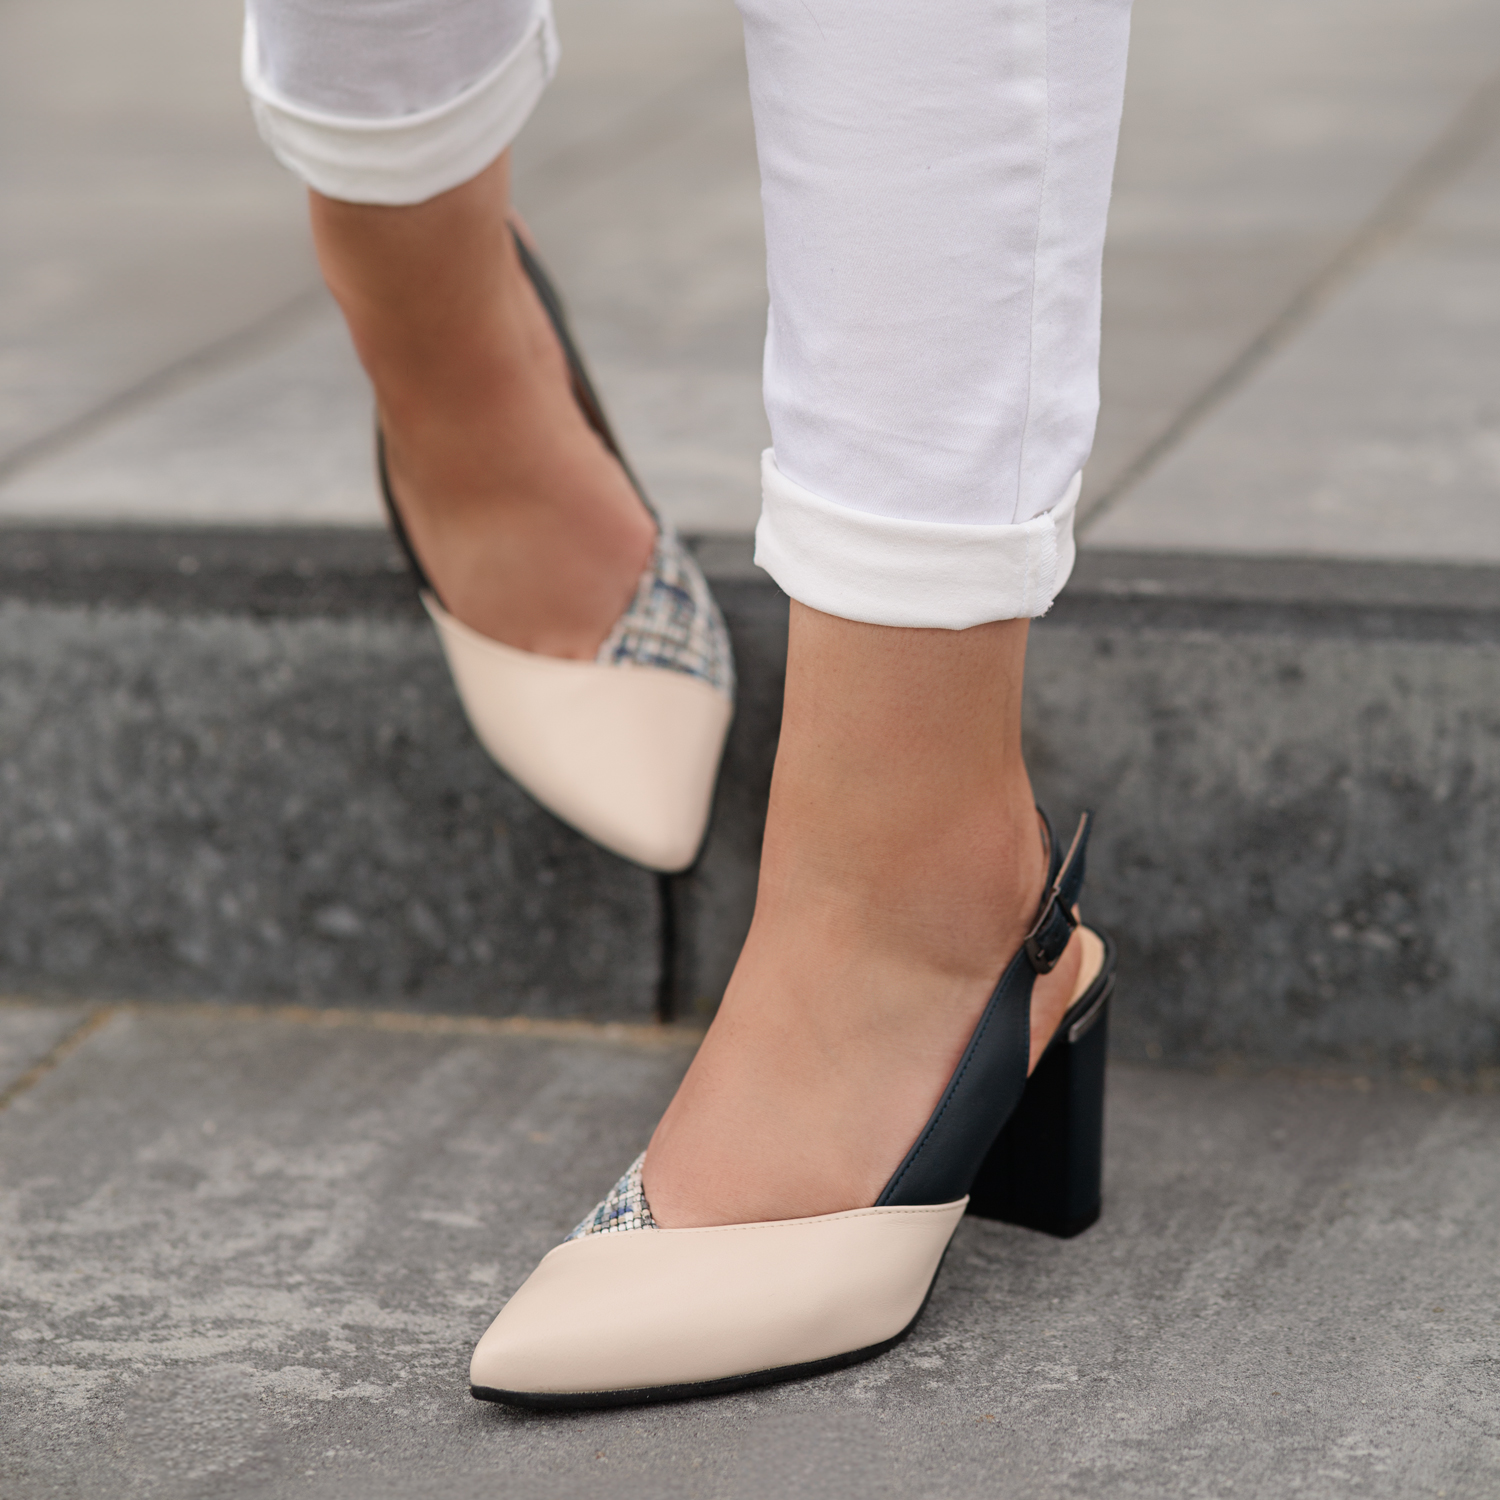  Beige and navy blue leather pumps